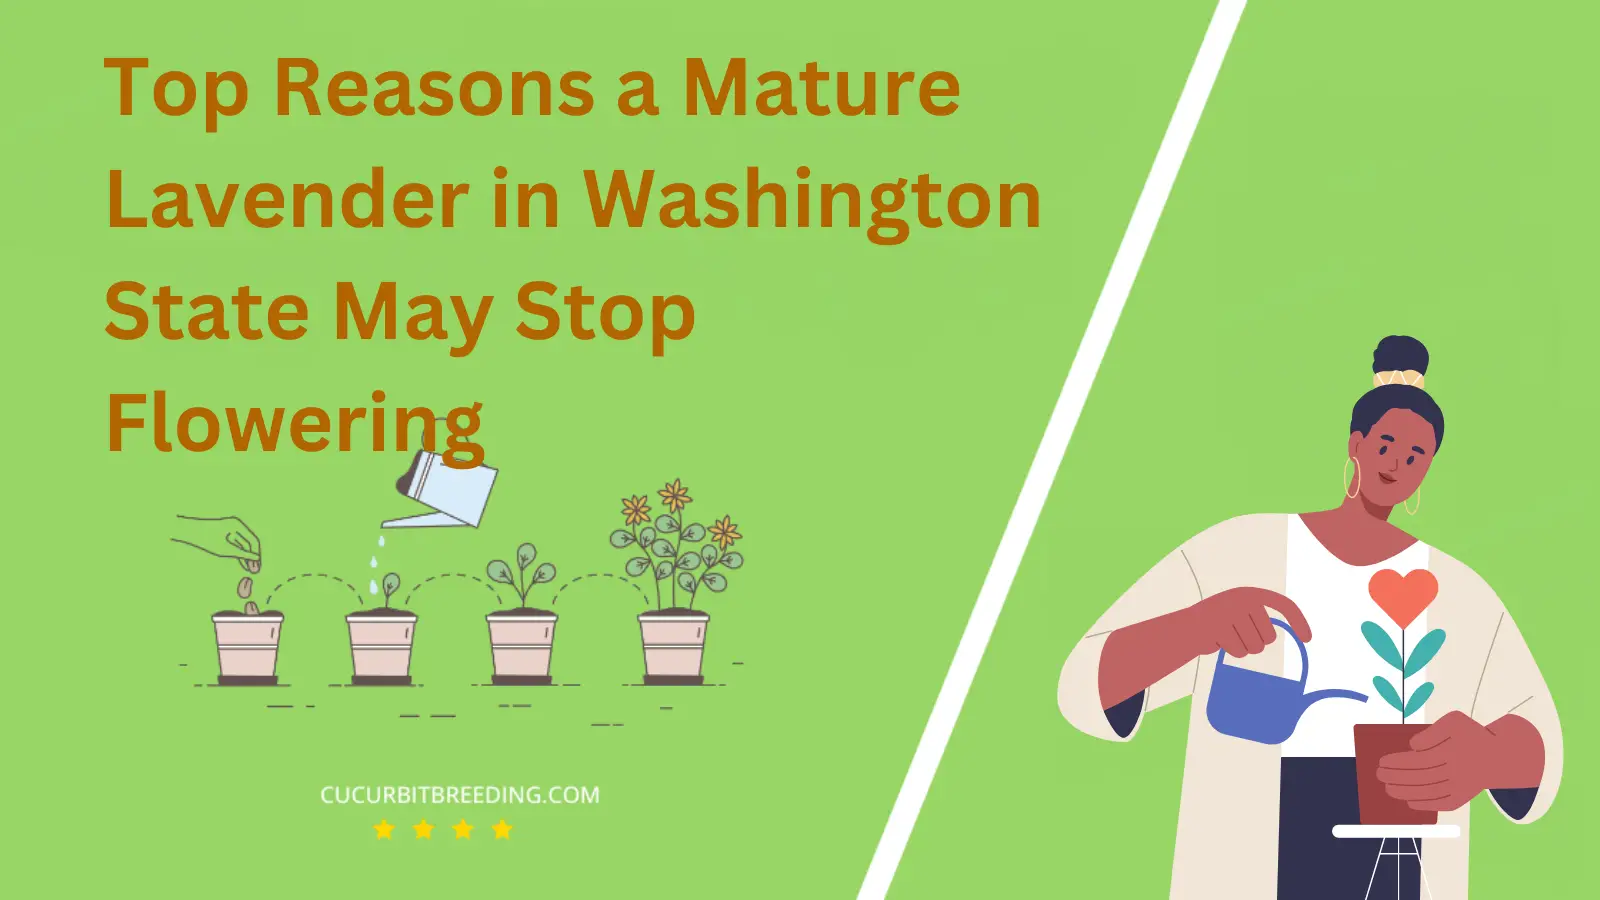 Top Reasons a Mature Lavender in Washington State May Stop Flowering